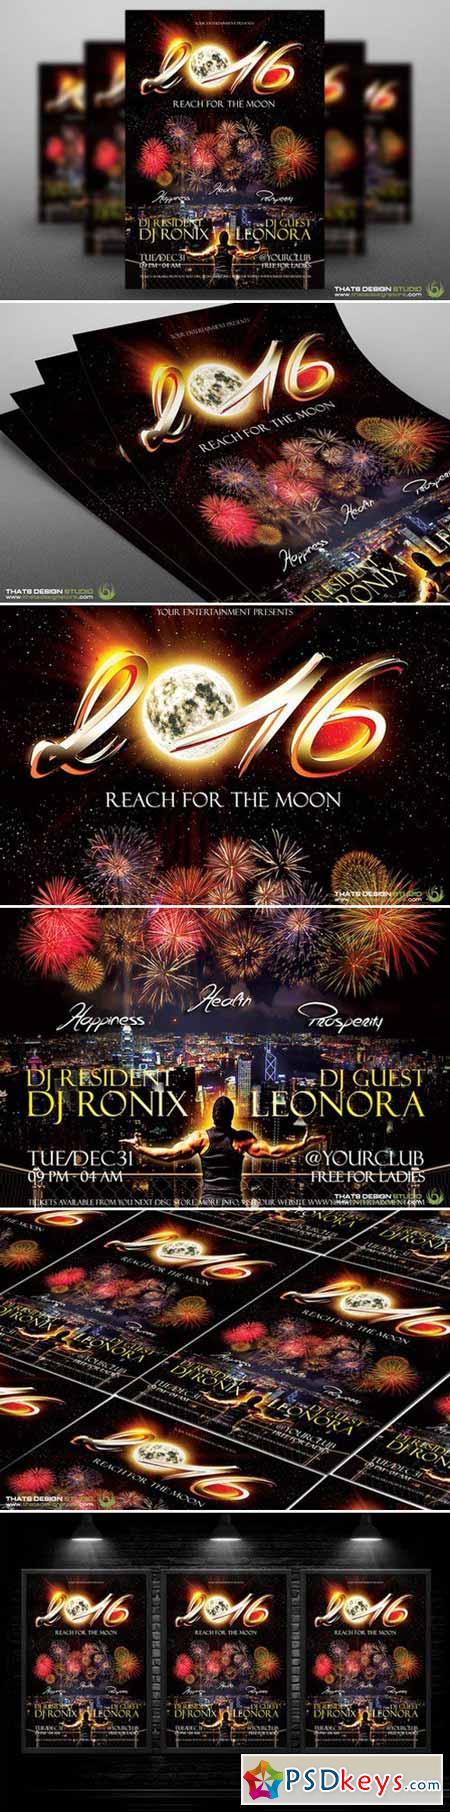 New Year Flyer Template V1 89891